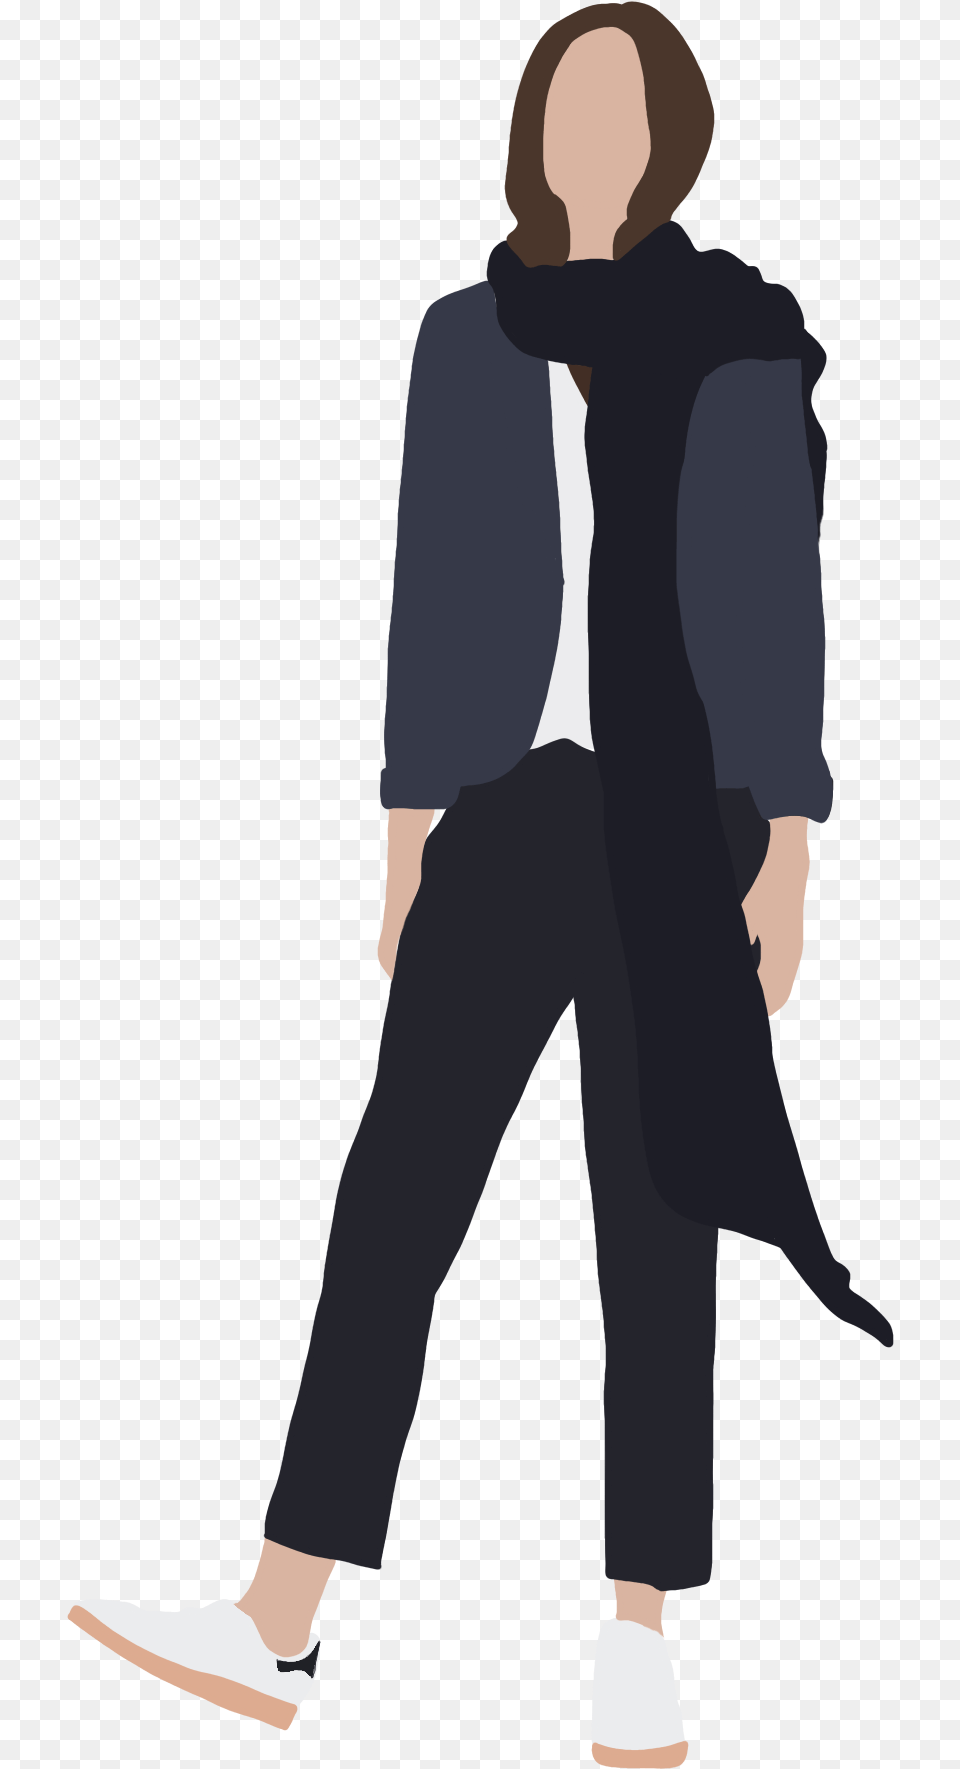 Architecture People Photoshop Cutout, Walking, Person, Formal Wear, Coat Png